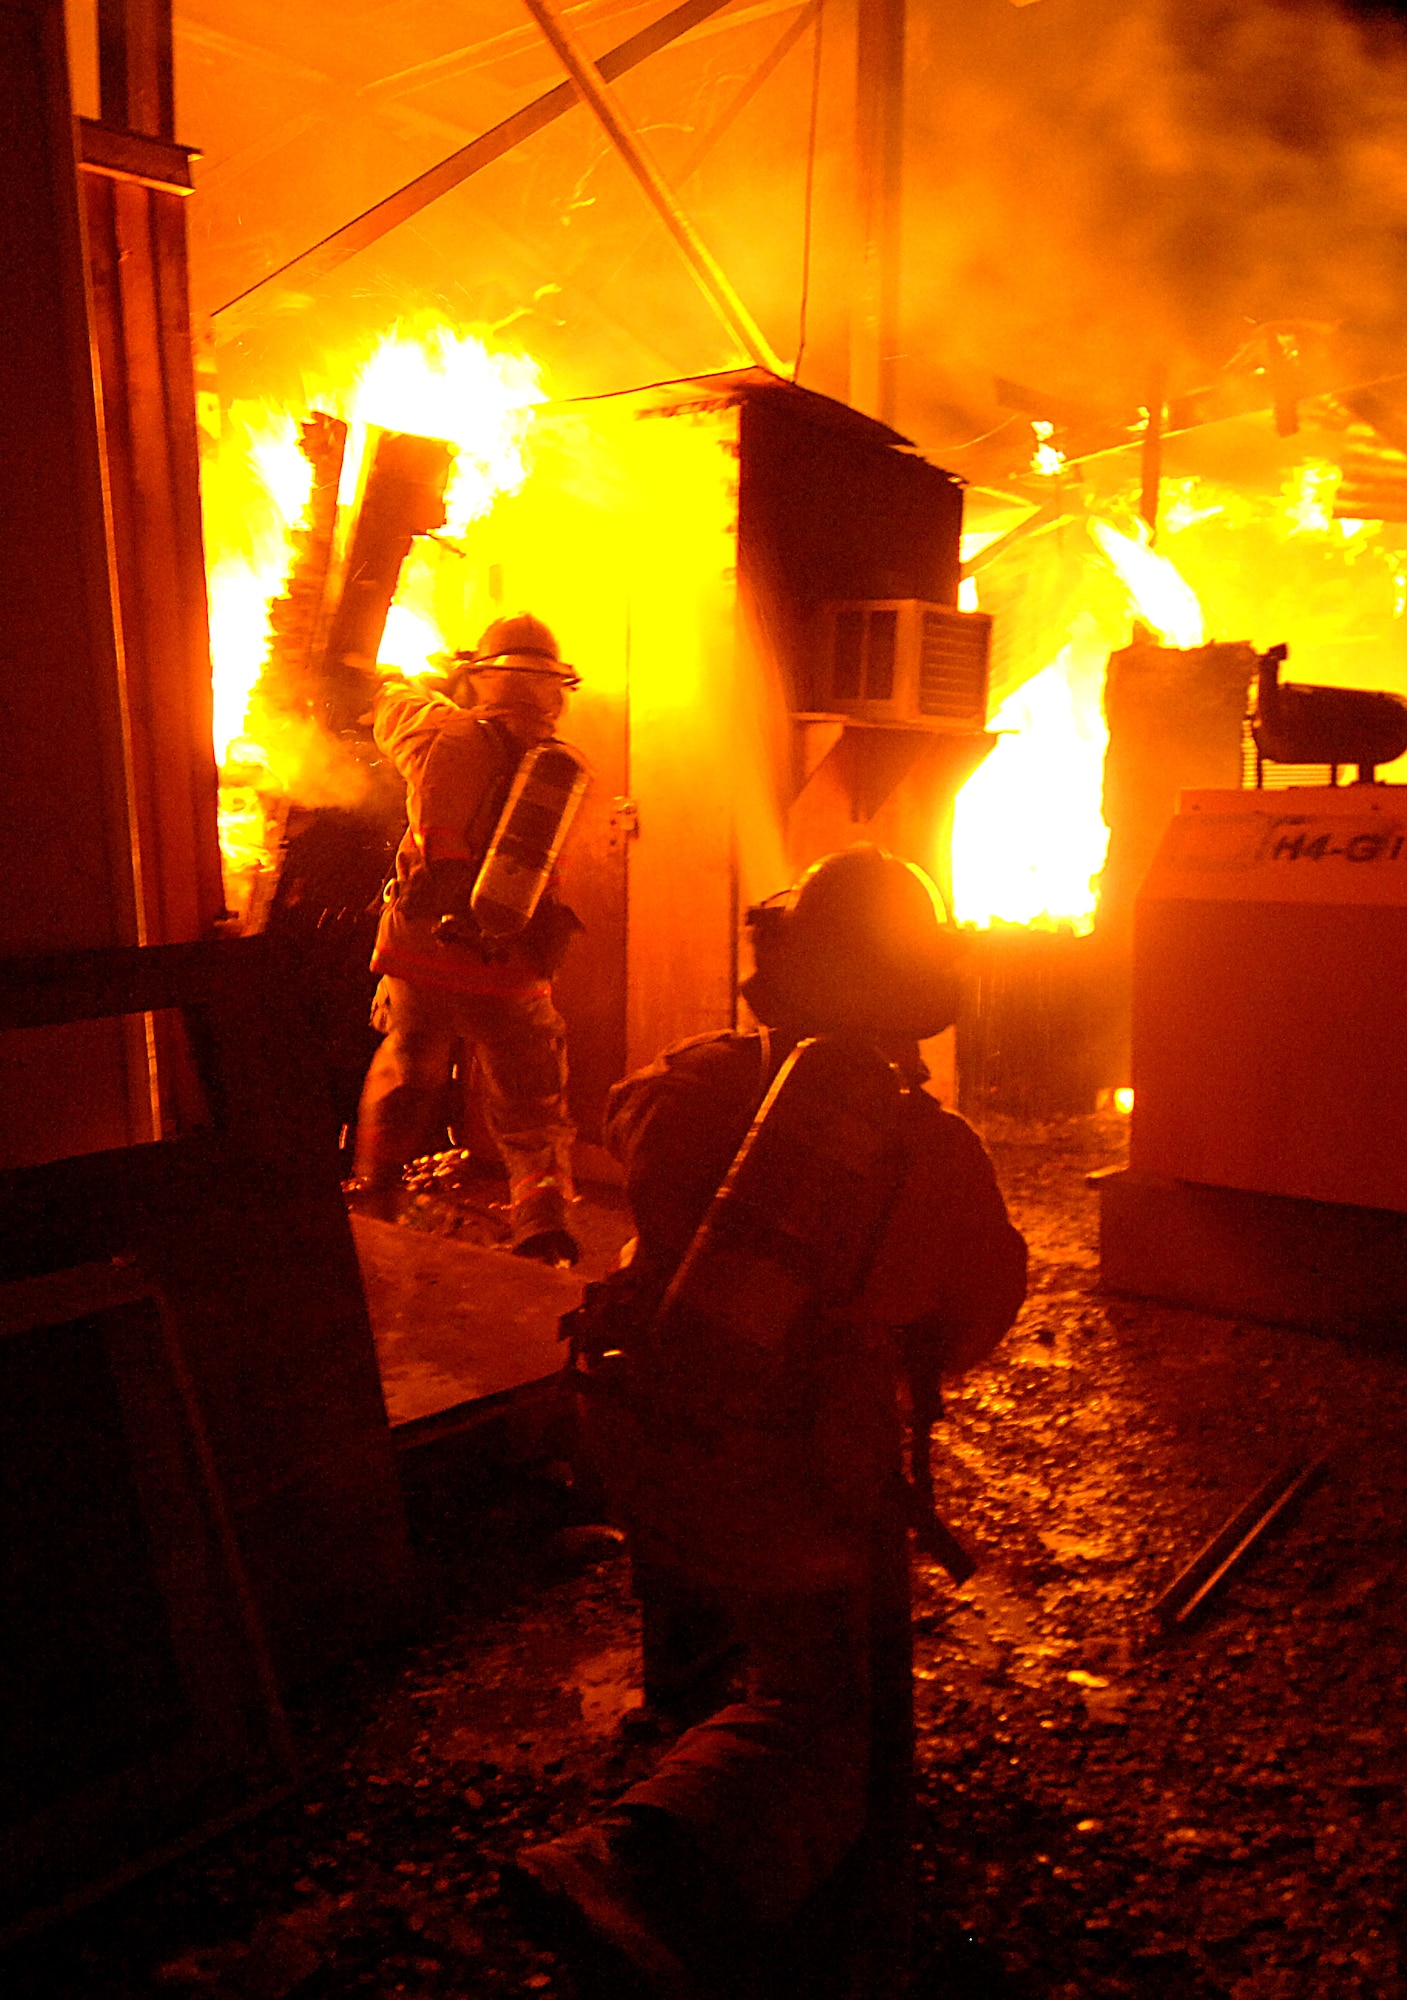 Firefighters from contractor Wackenhut Fire and Emergency Service battle a fire at Forward Operating Base Marez in Mosul, Iraq, on Thursday, June 8. The fire was at a local restaurant and jewelry store. (U.S. Air Force photo/Tech. Sgt. Jeremy T. Lock) 




